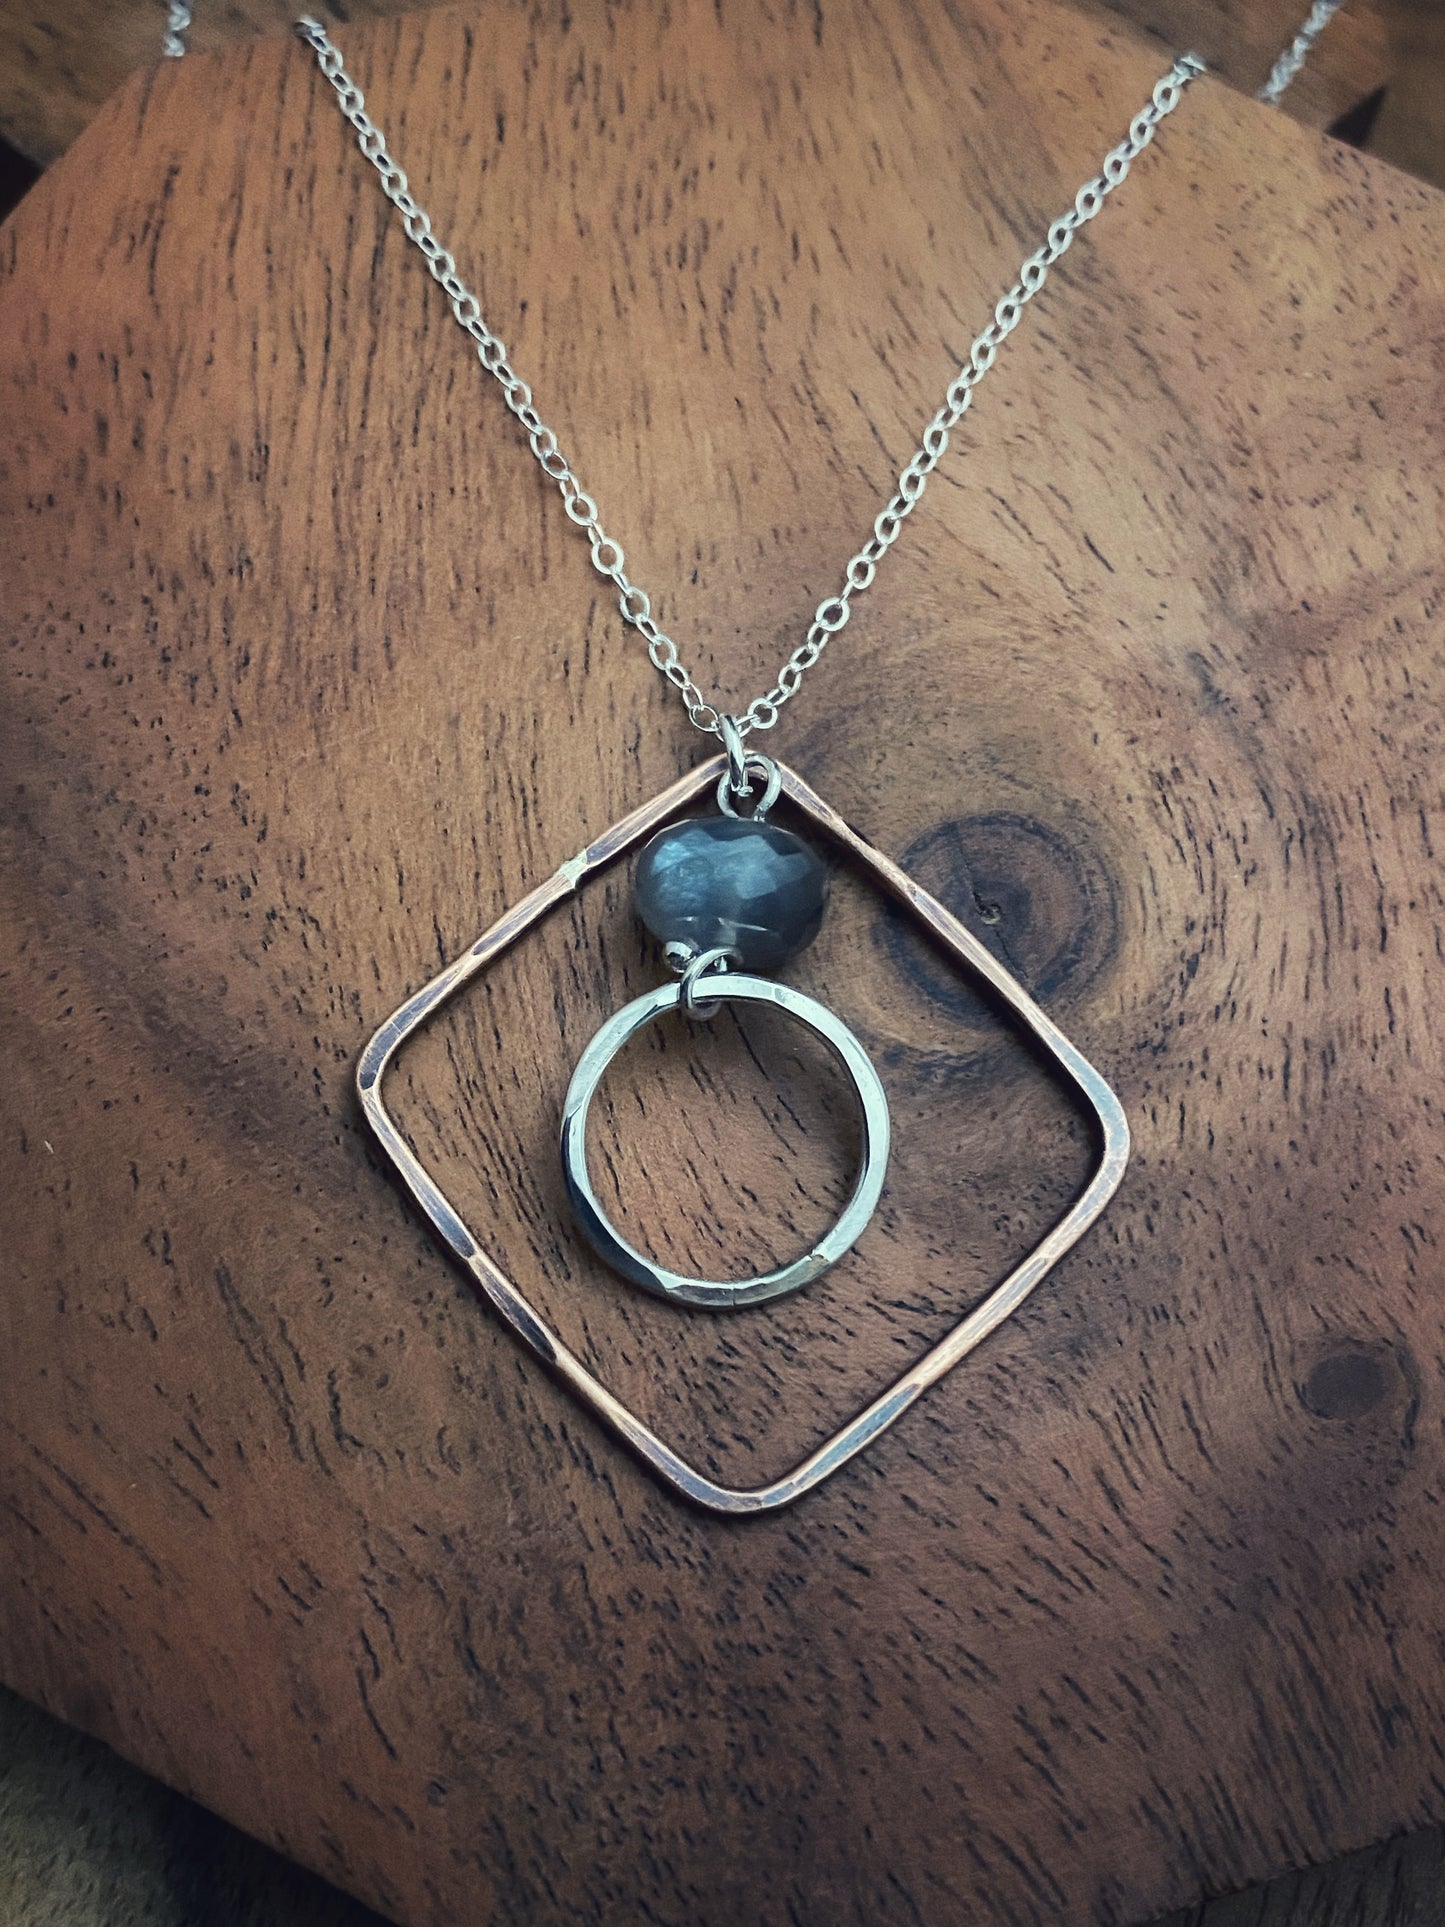 Sterling silver and copper forged hoop necklace with labradorite gemstone